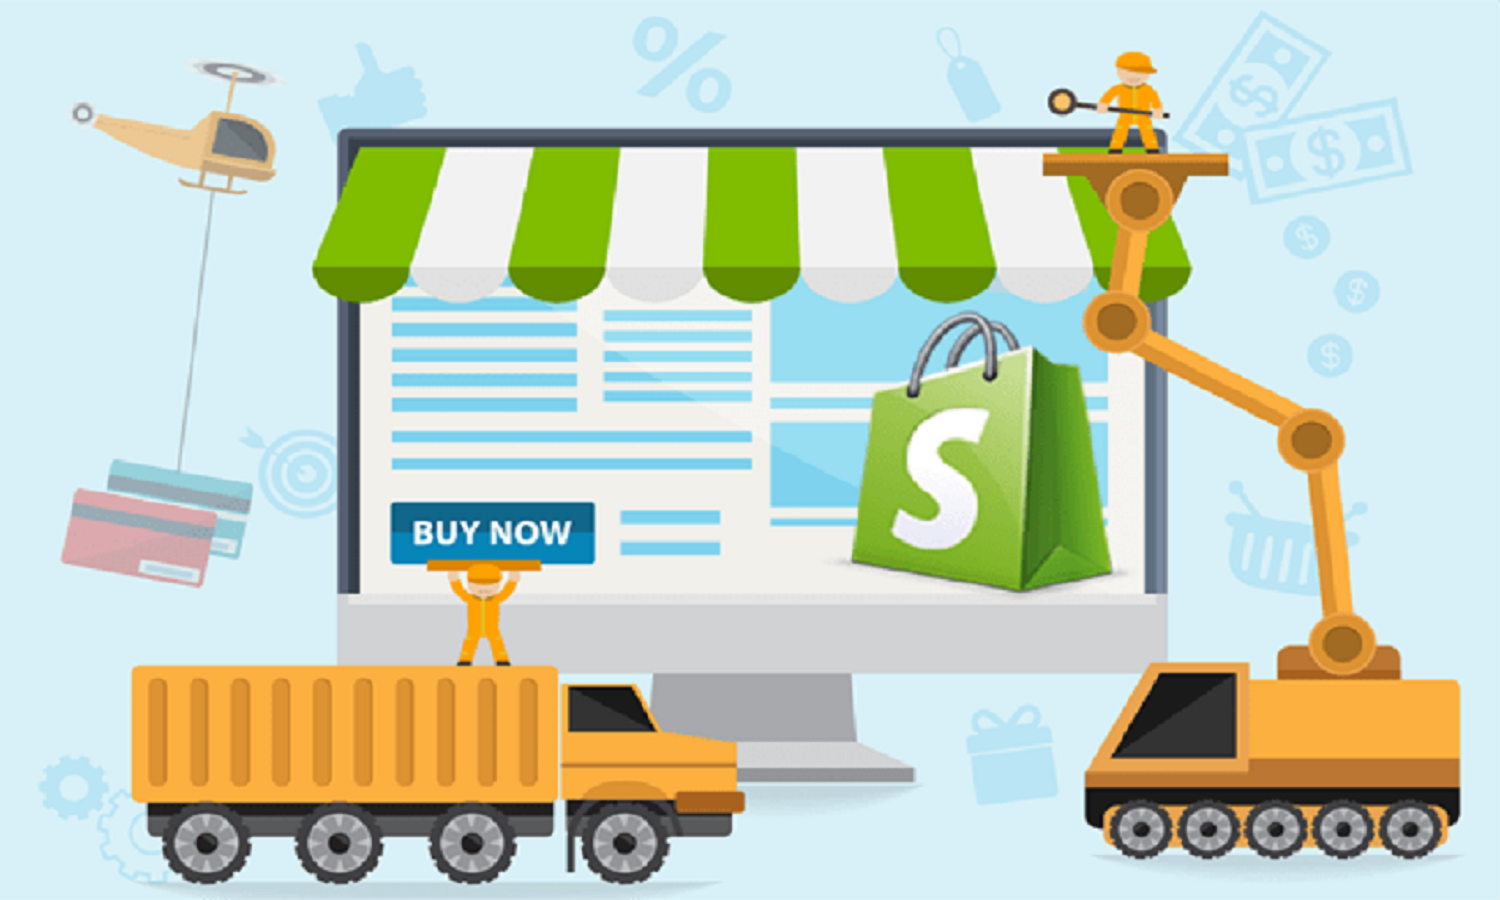 TechIndia Software- A One-Stop Shop For Shopify Web Development Services